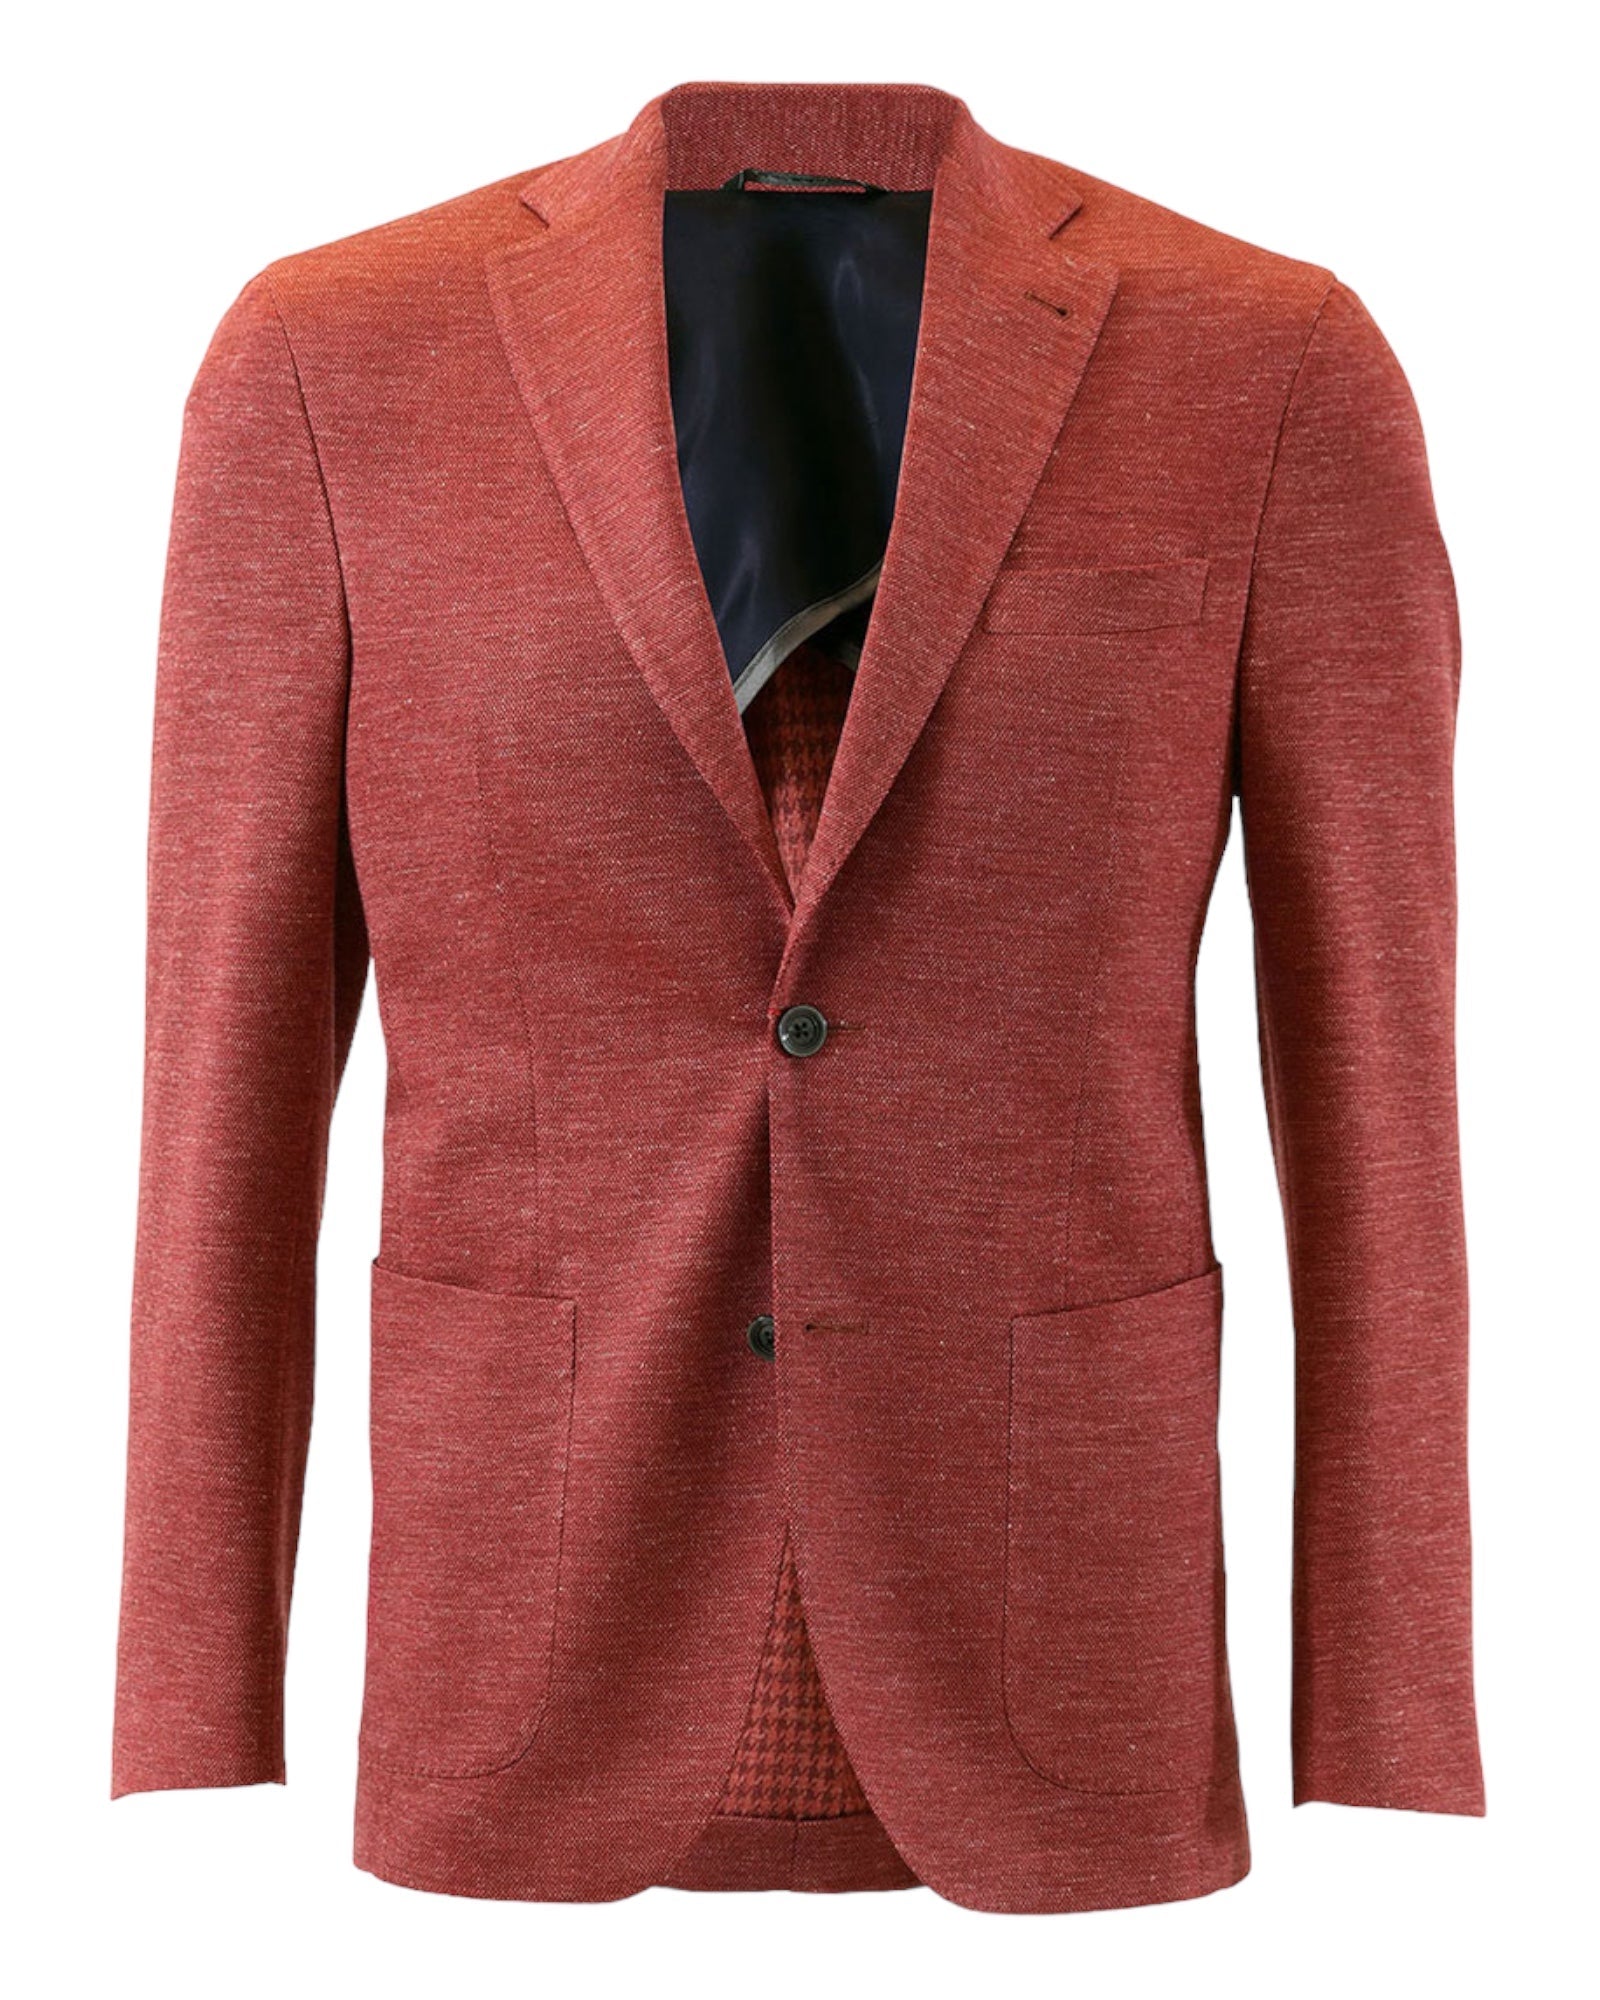 Double Face Jersey Blazer - Coral JACKETS40S